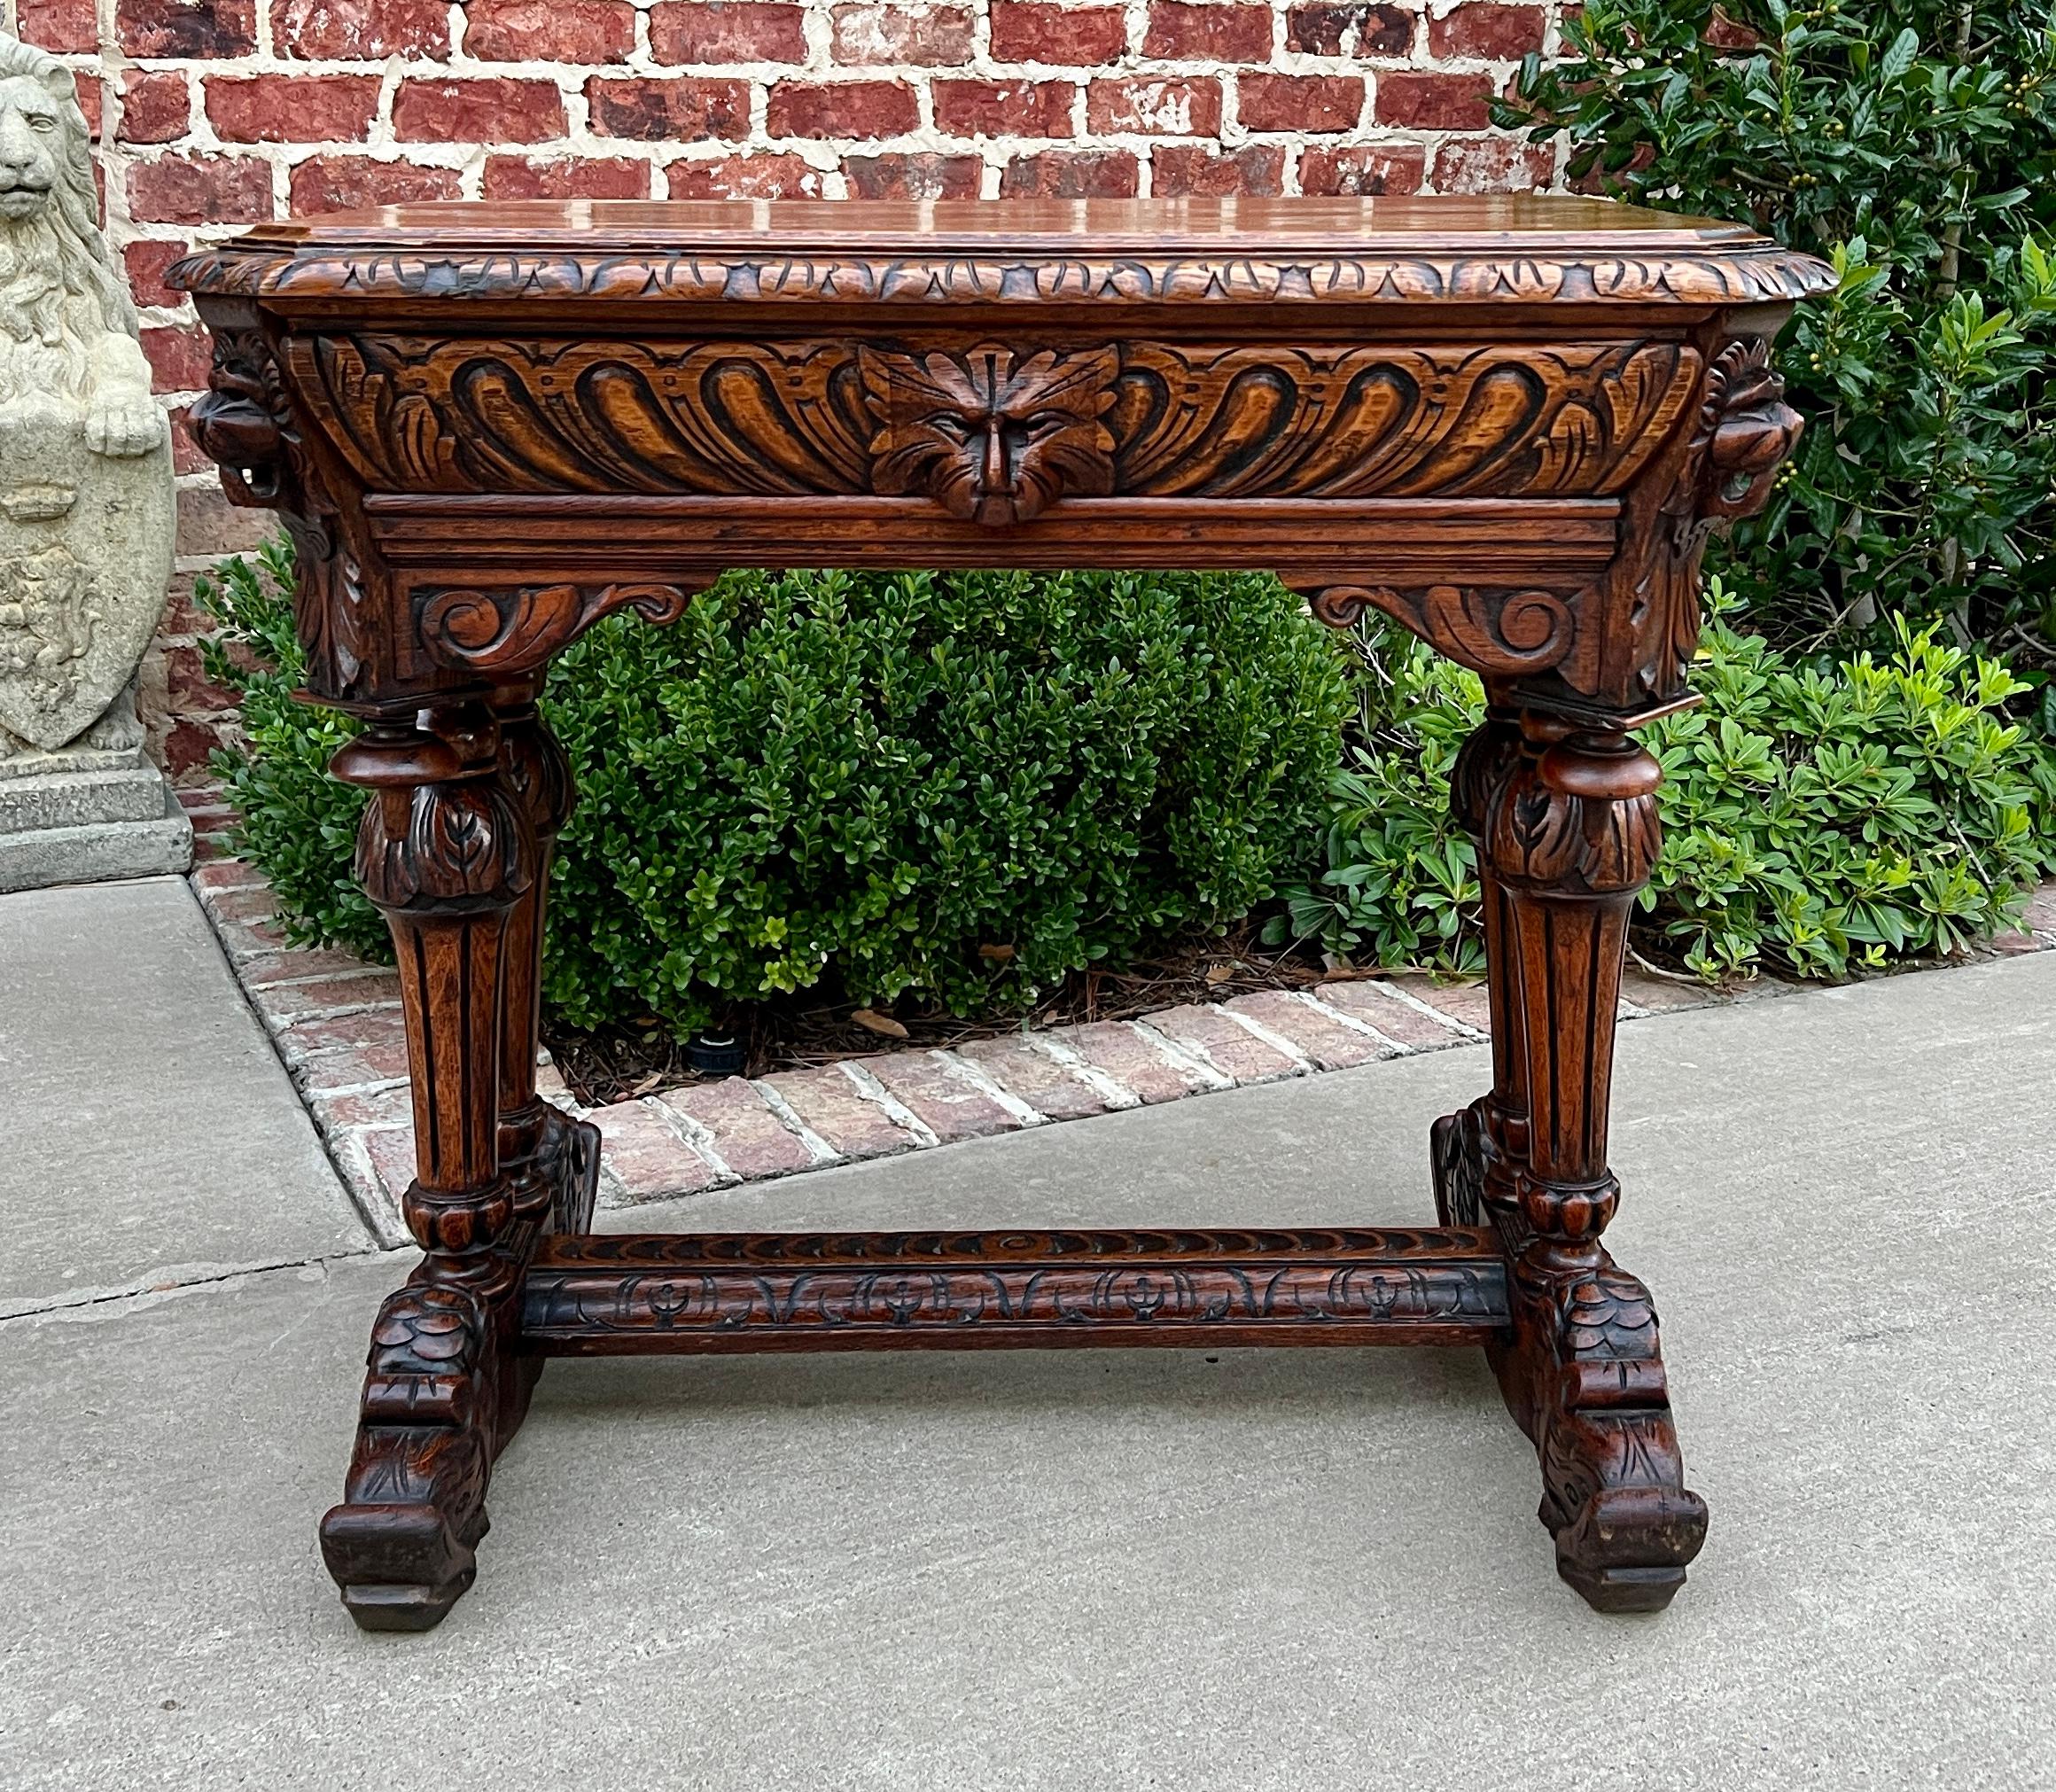 BEAUTIFUL PETITE Size Antique French Honey Oak Renaissance Revival Writing Desk or Table with Drawer and Double Pedestal
~~c. 1890

With so many people working from home now, DESKS have become our most often requested items this year~~this is a